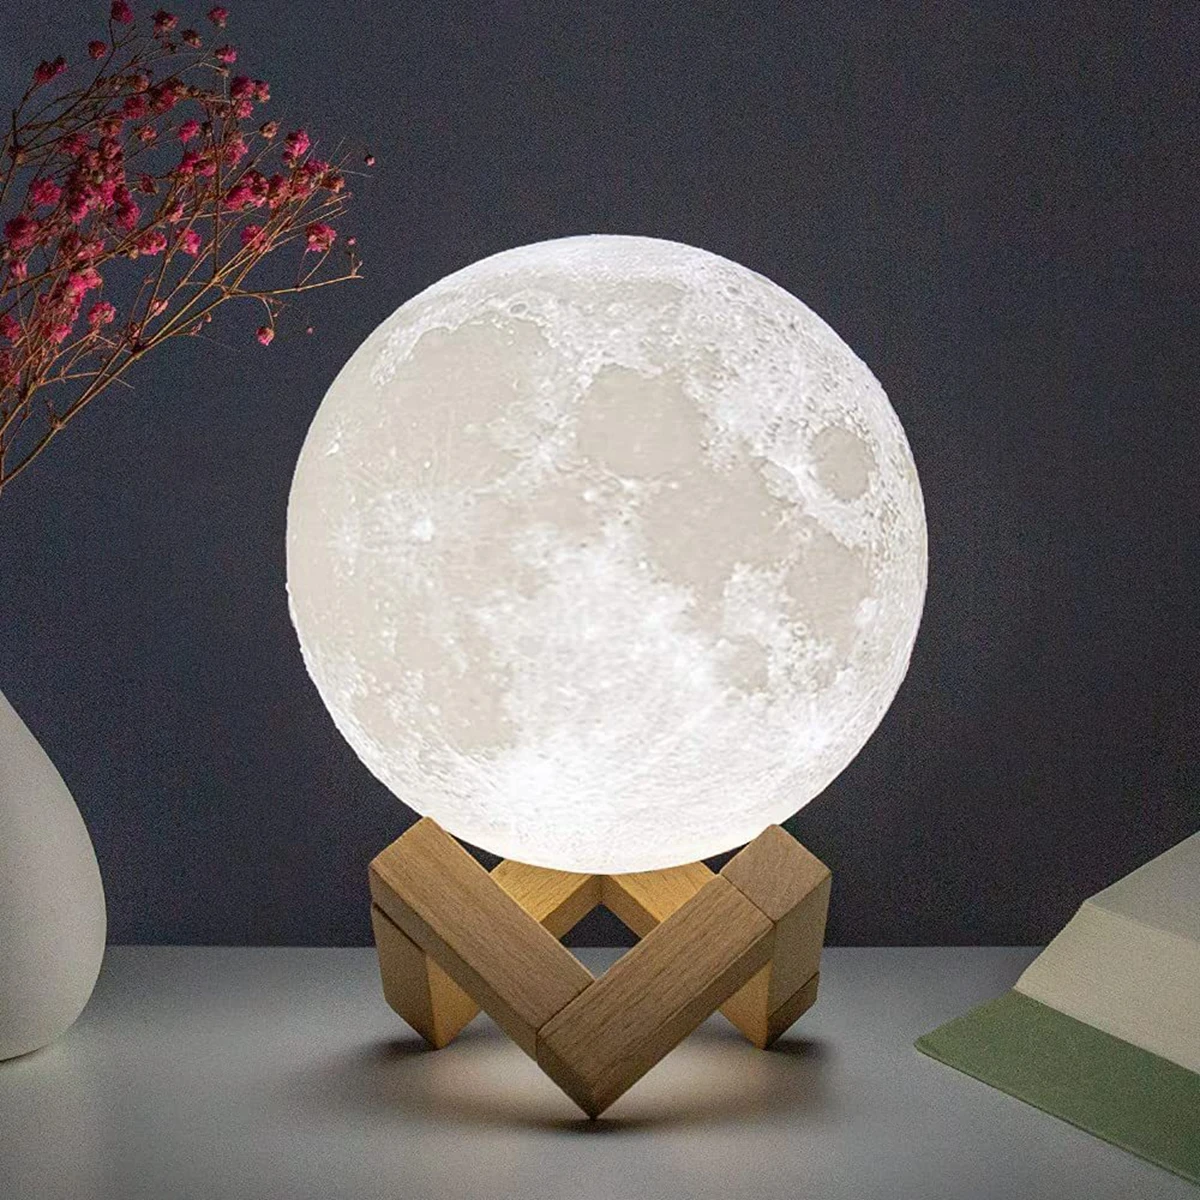 Starry Night: 8cm Moon Lamp LED Night Light with Battery Power and Stand - Perfect Bedroom Decor and Kids Gift 6